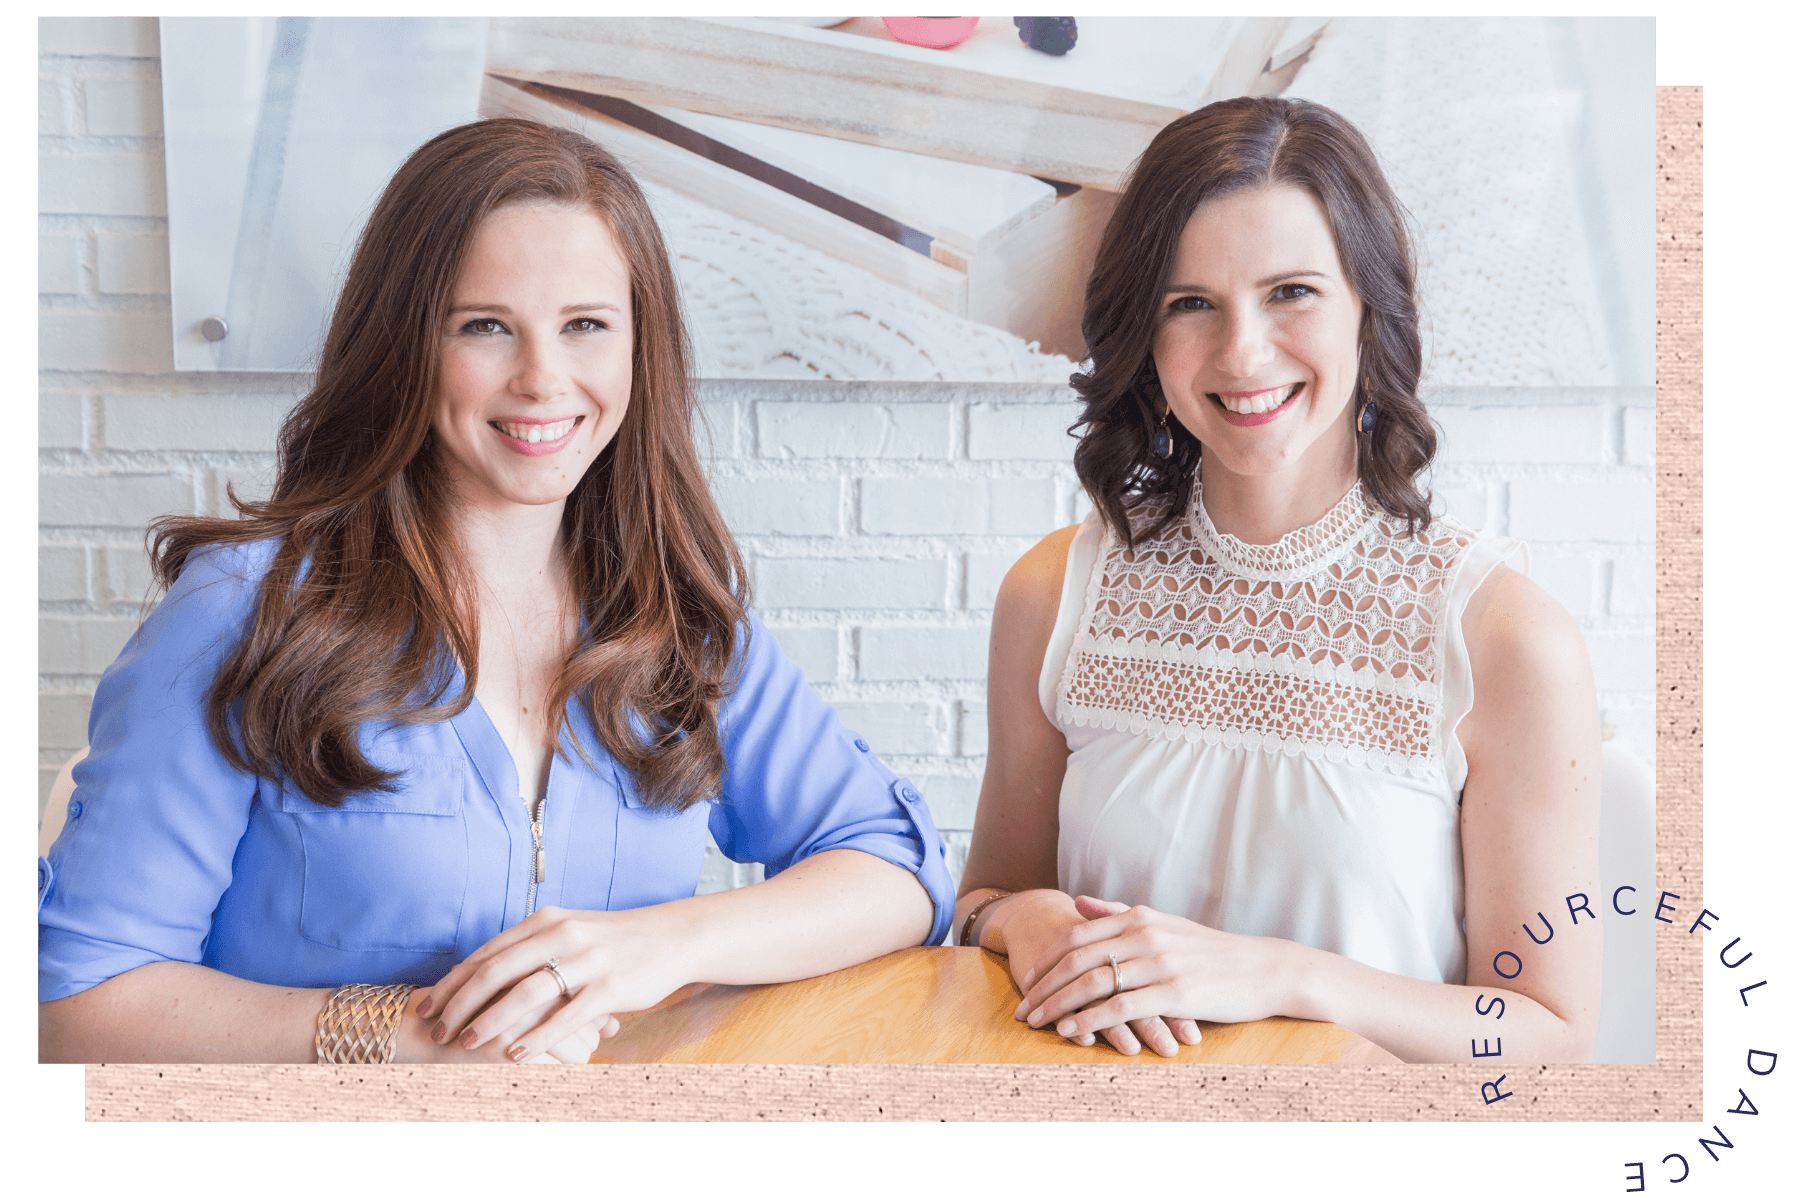 Meagan and Colleen | Resource Dance Founders